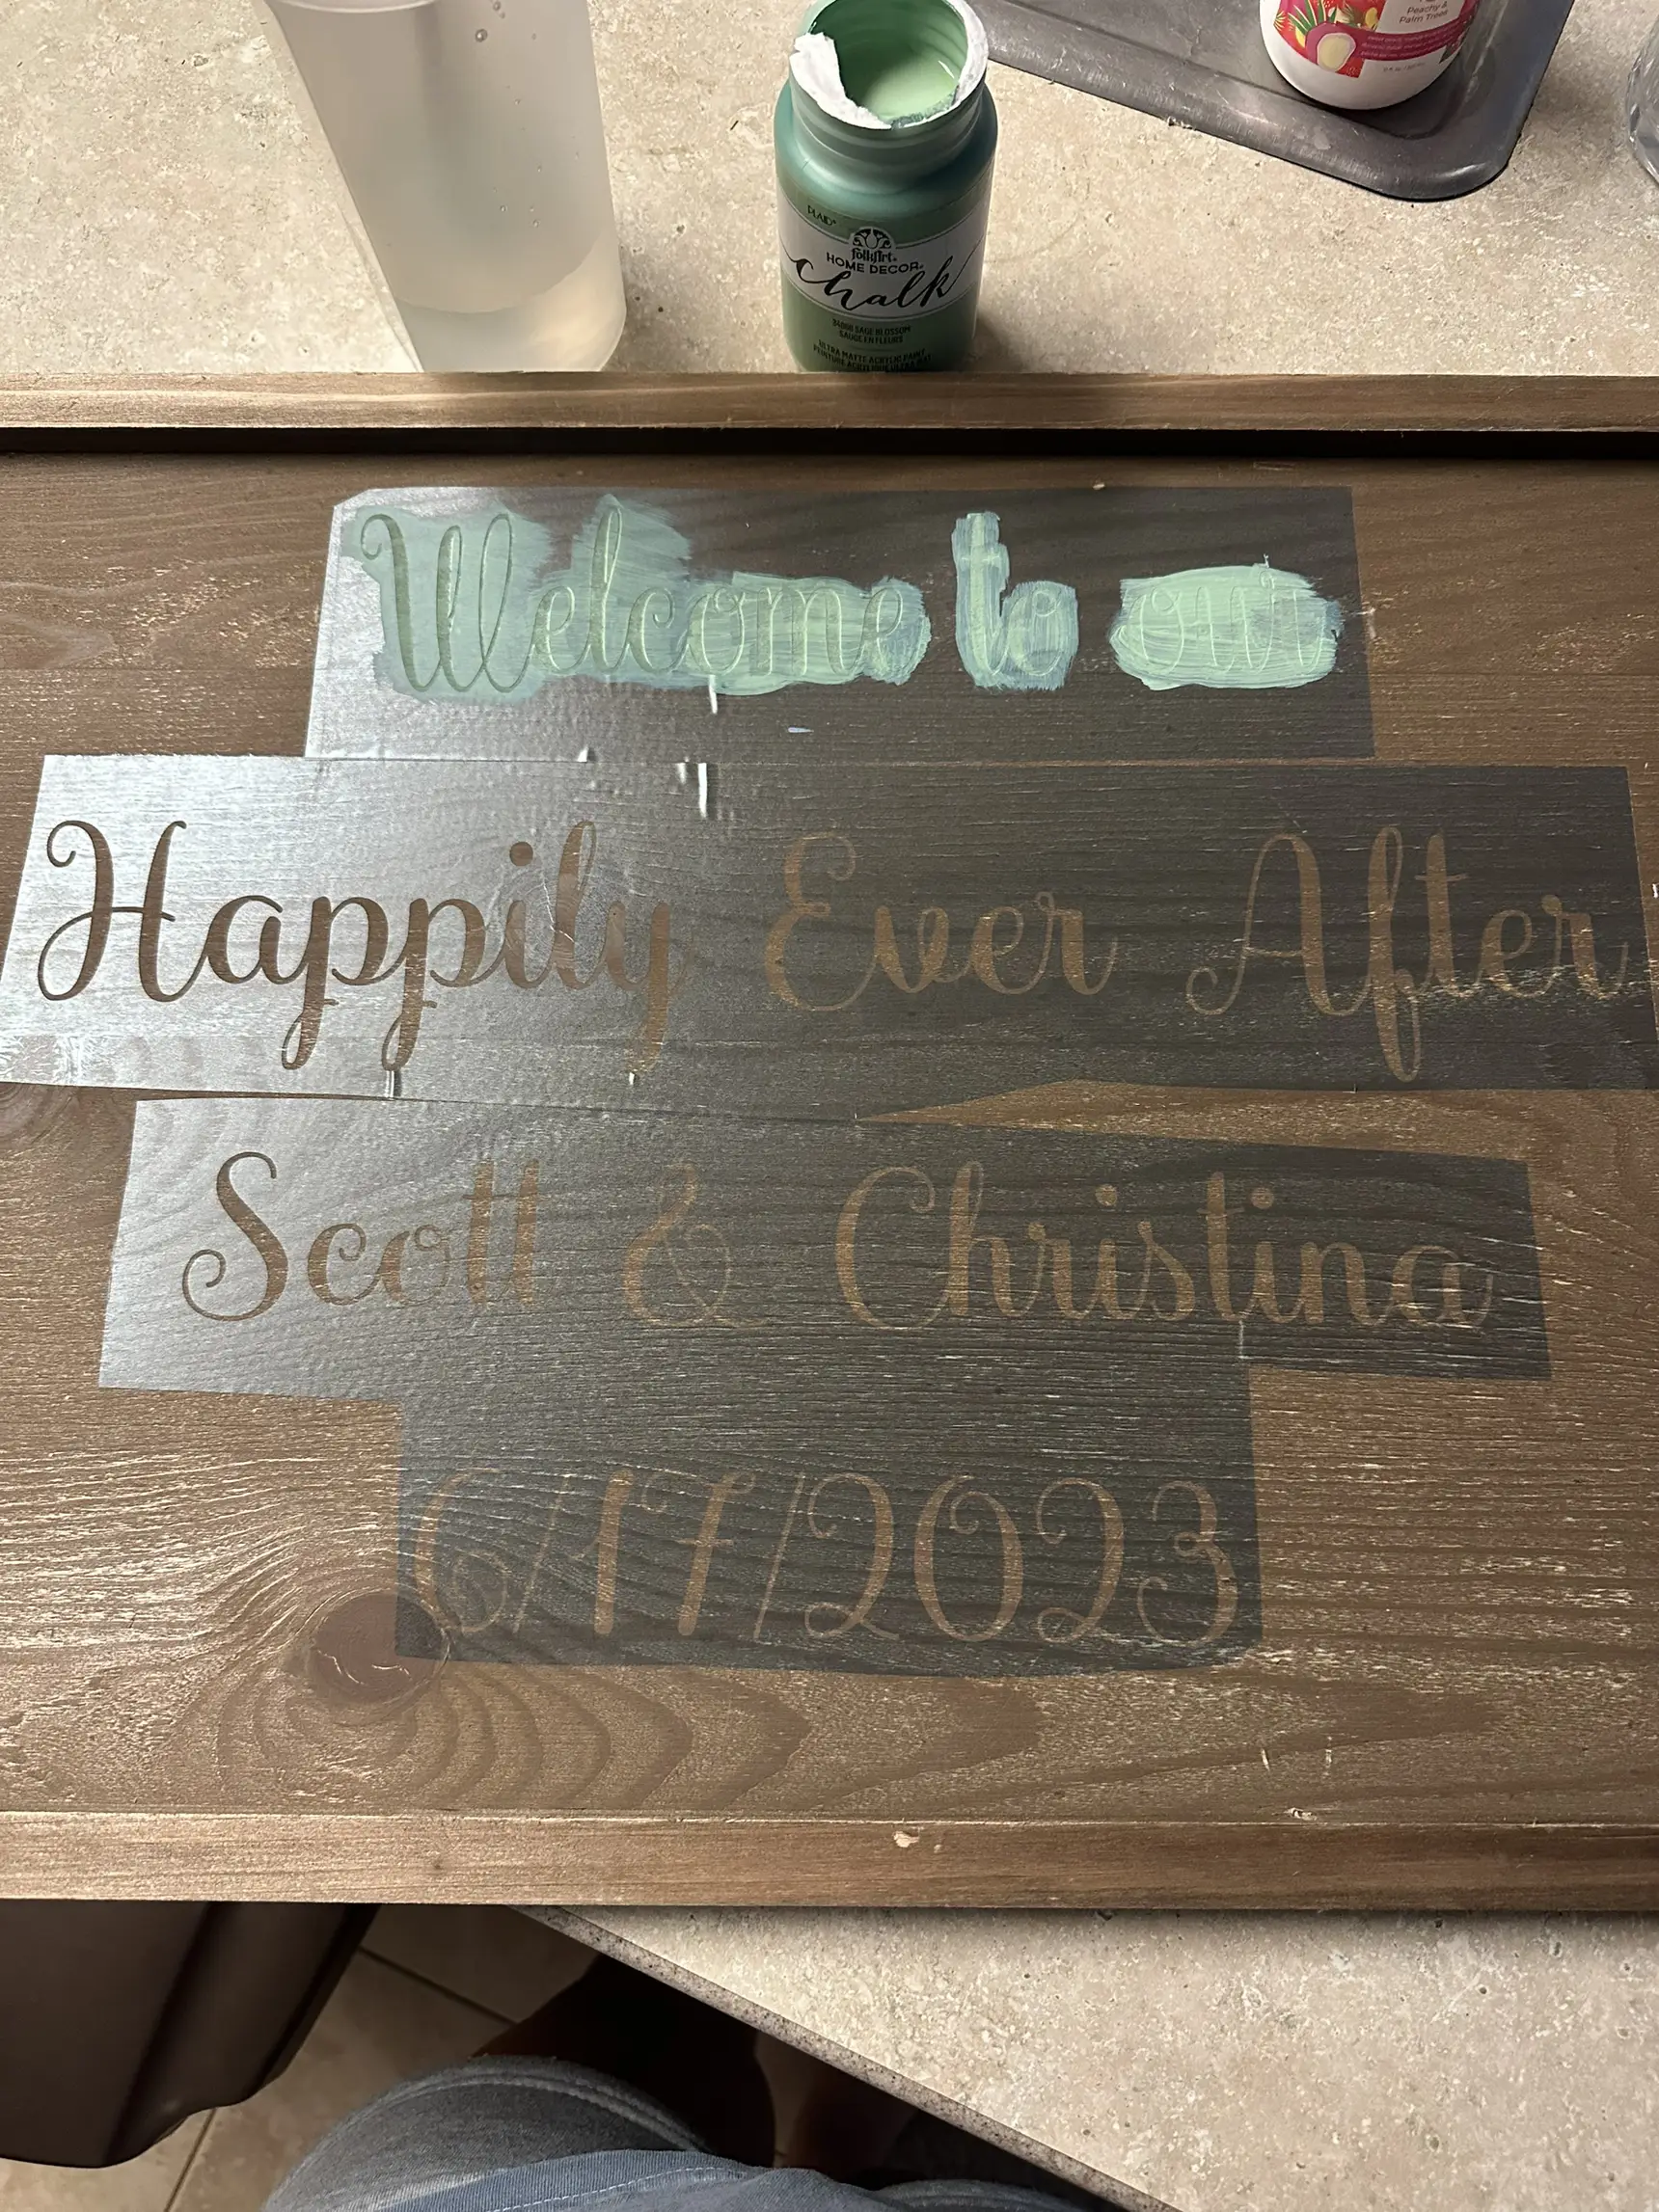 How to: restick a cricut mat, Gallery posted by Lillian Hunt